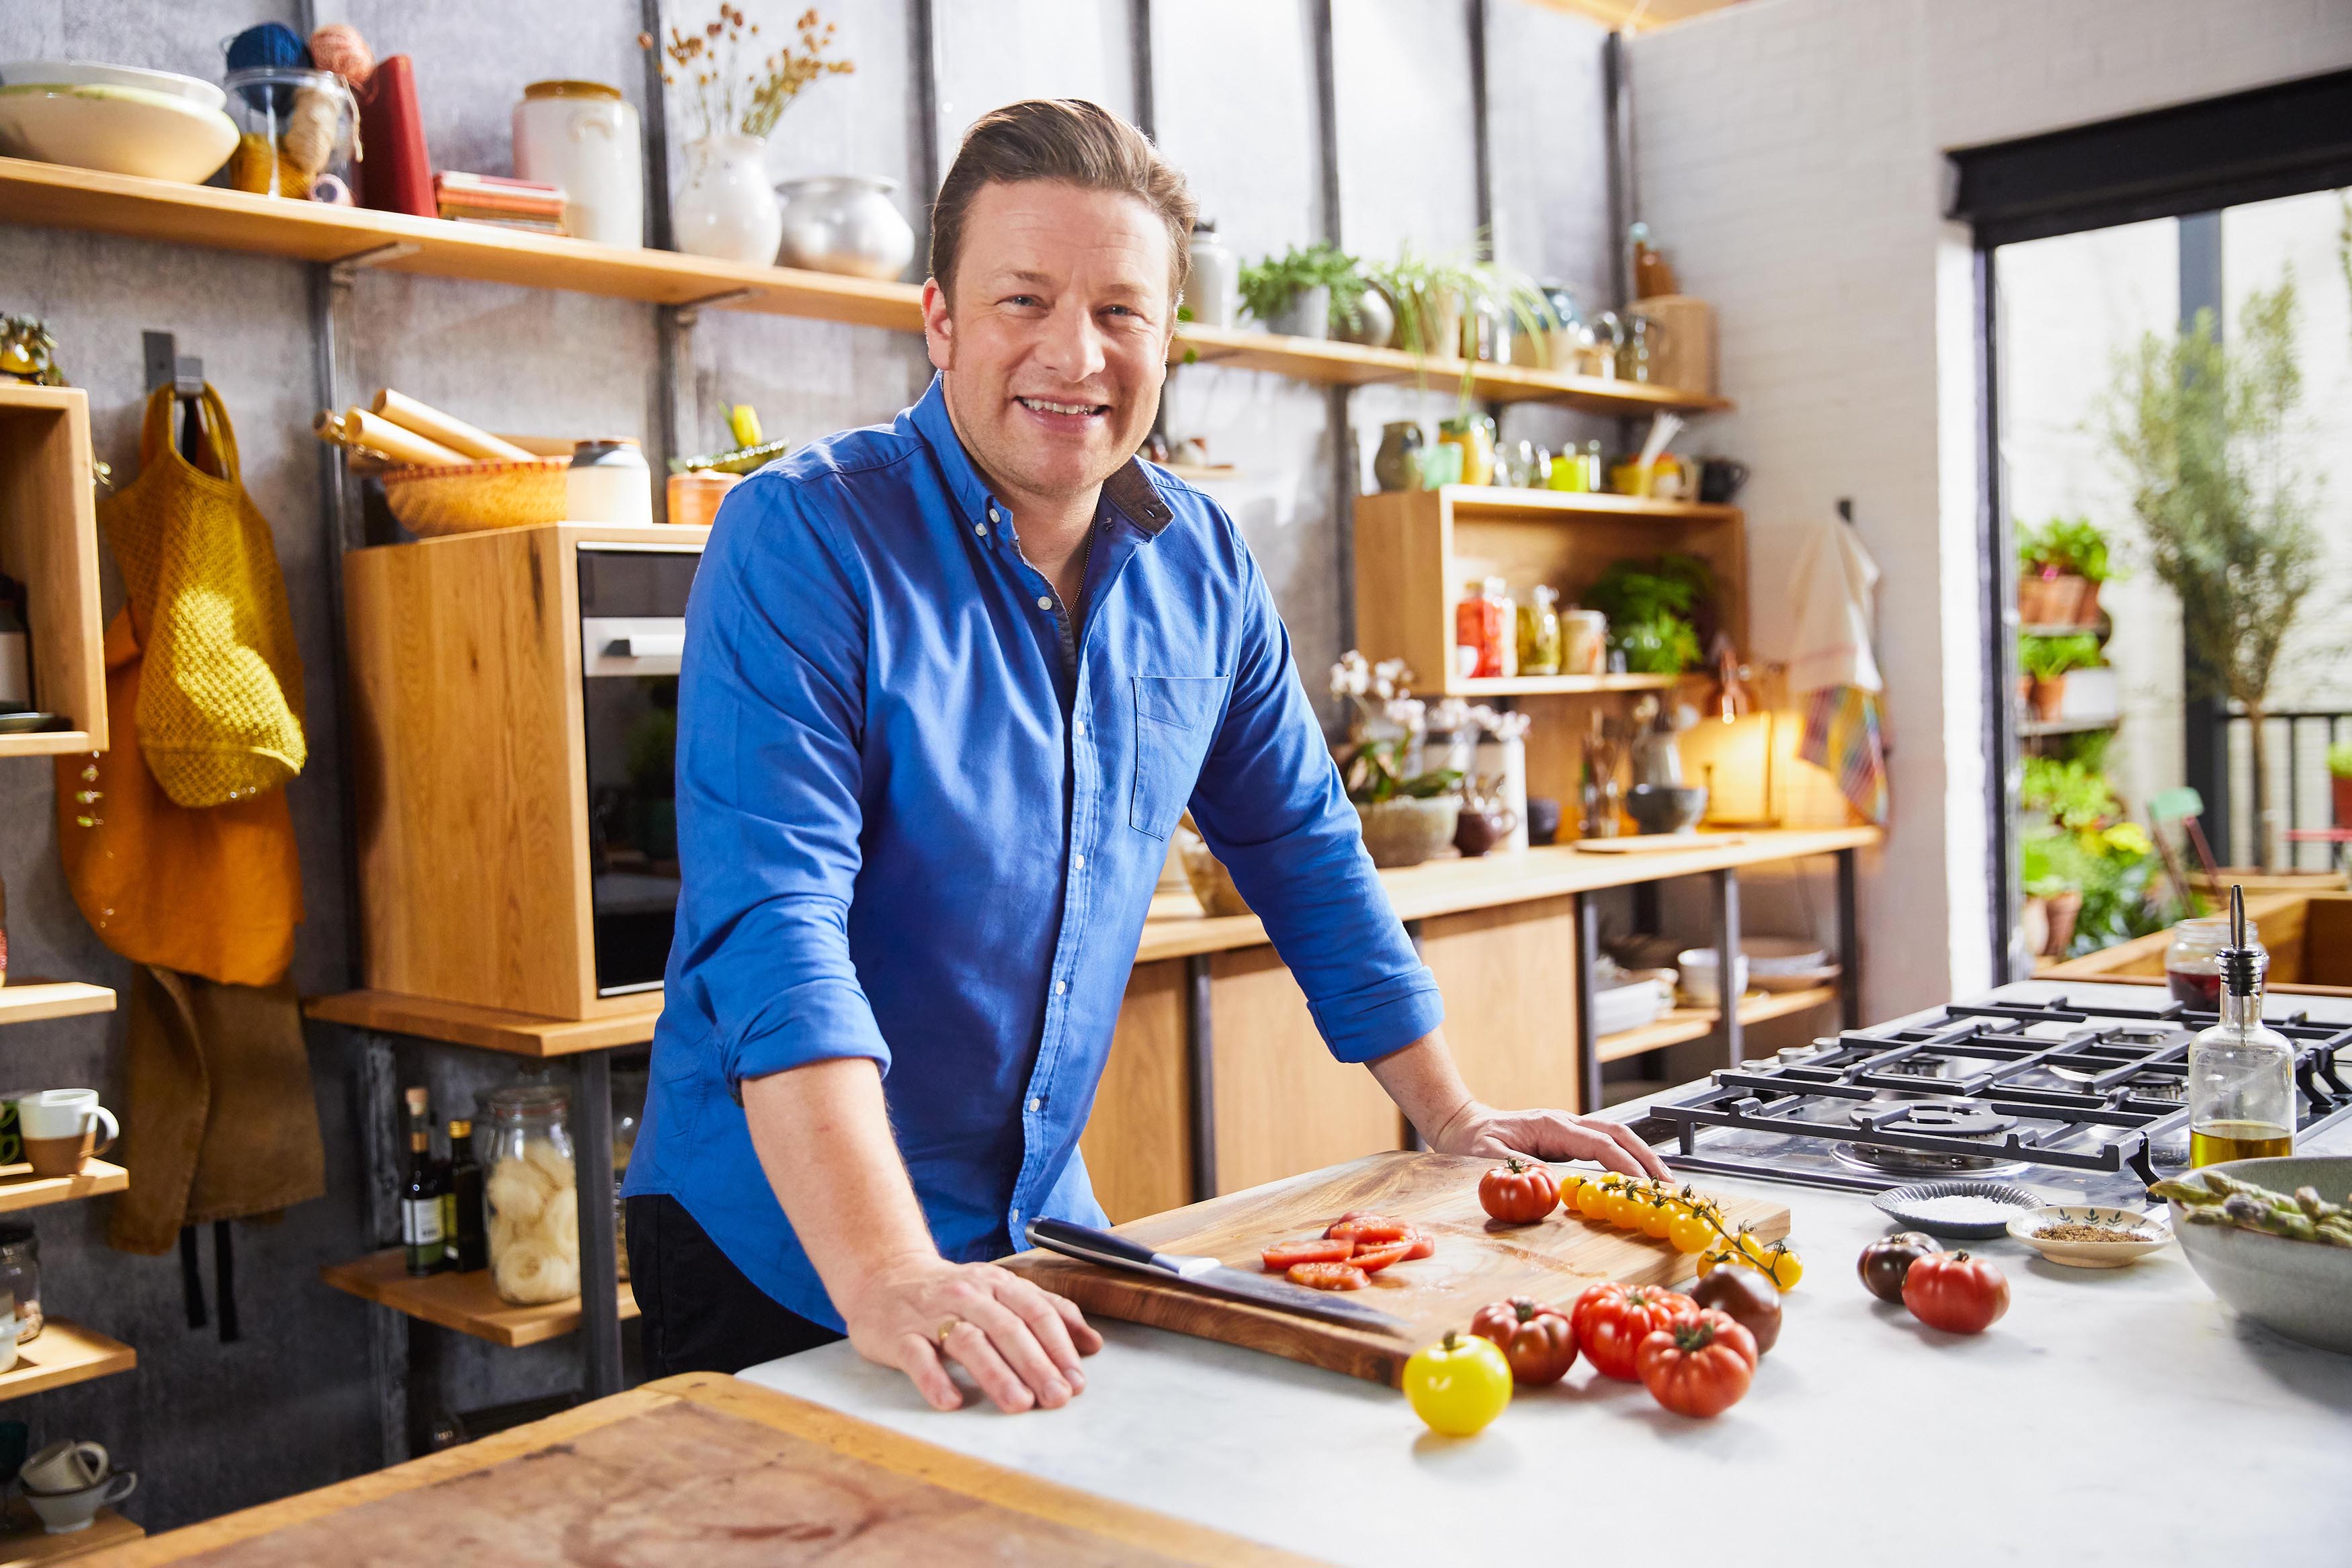 Jamie Oliver's new cooking show Together showcases recipes to